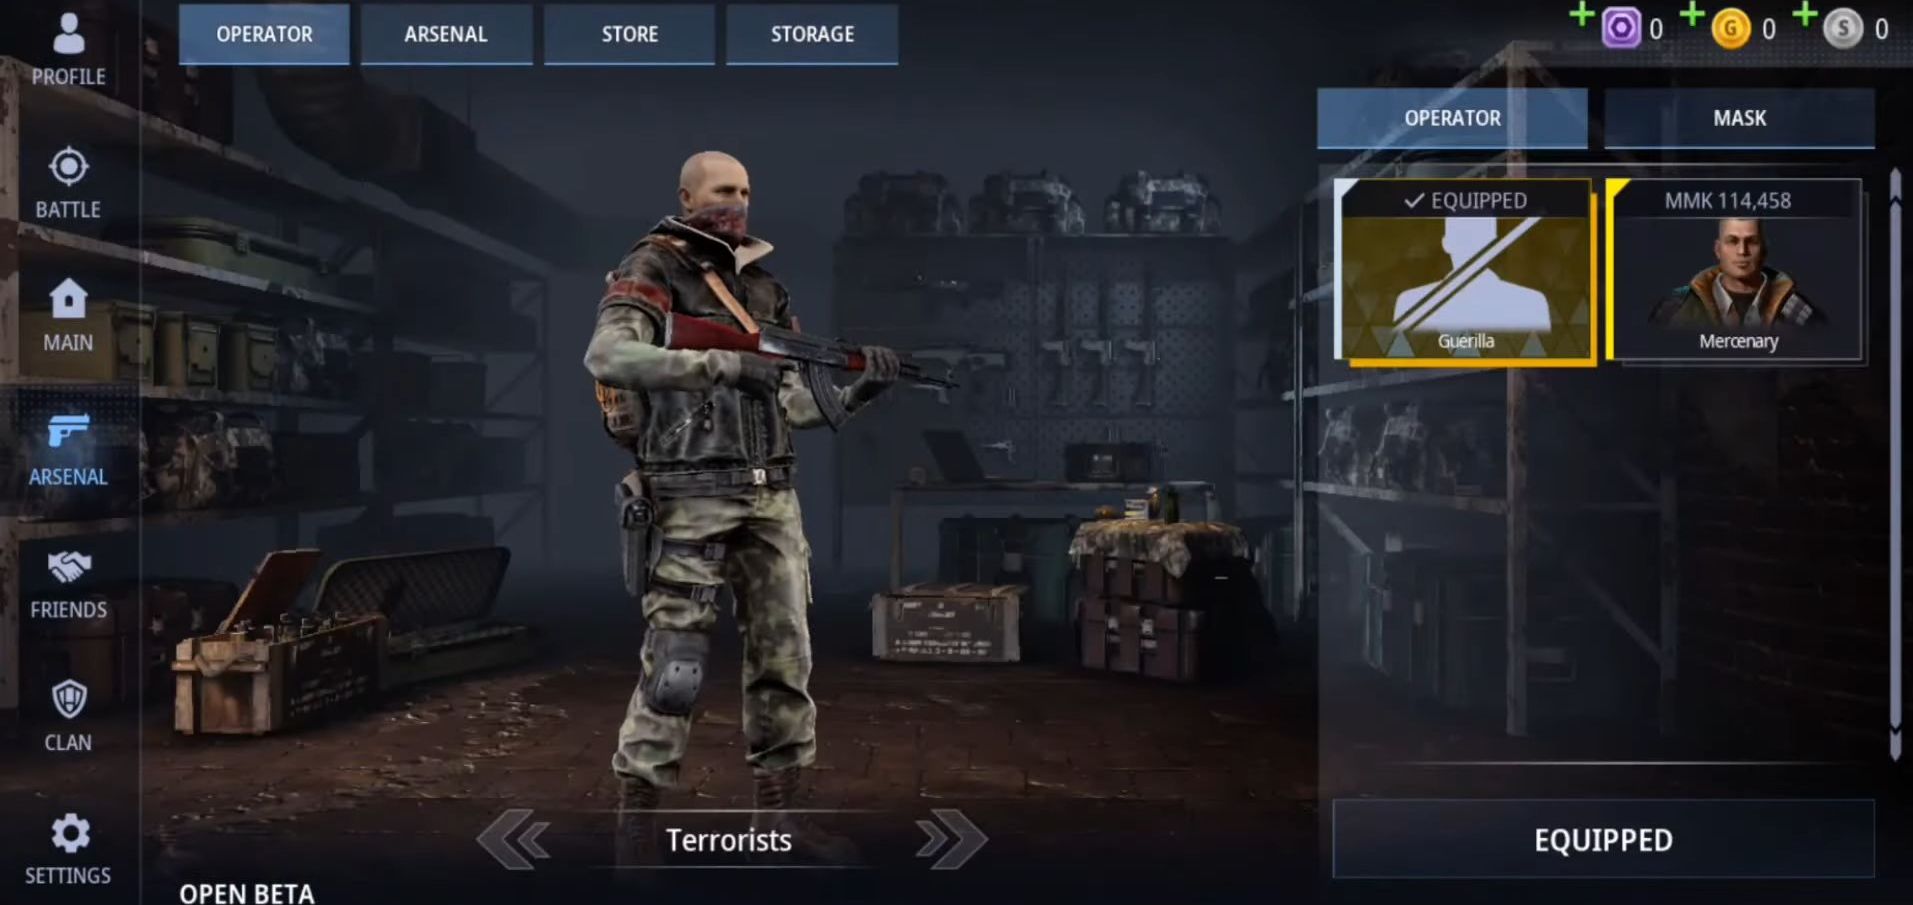 Scarica Special Forces Group 3: Beta gratis per Android.